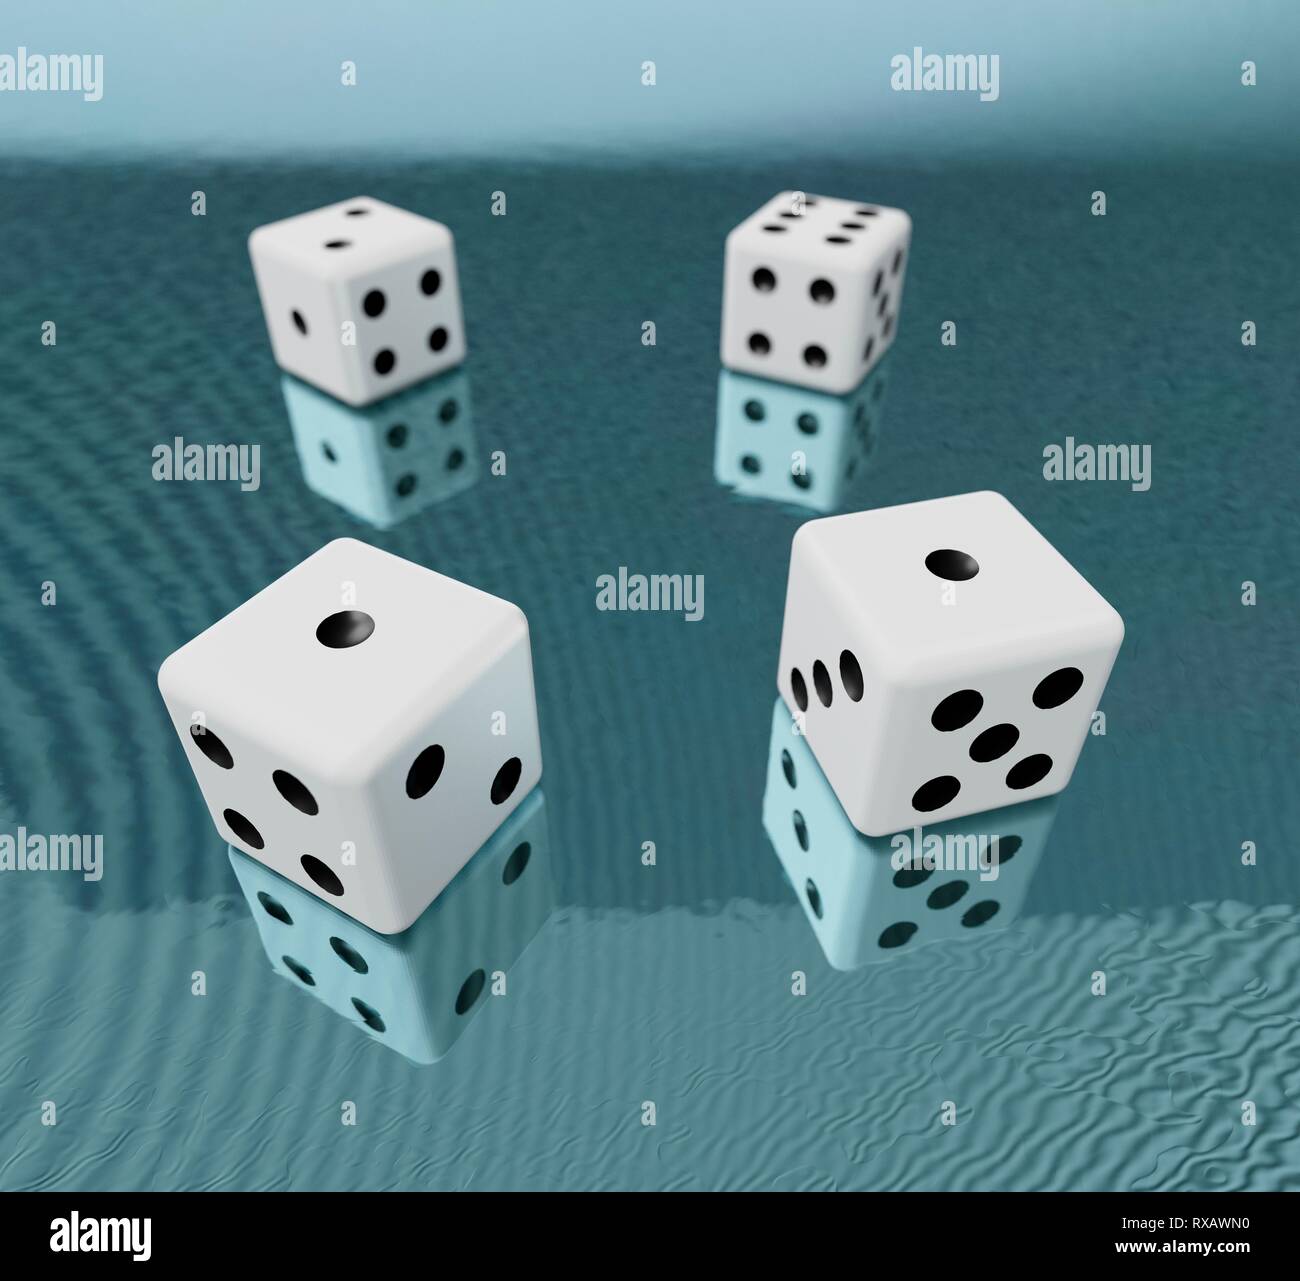 Dice and waves, illustration Stock Photo